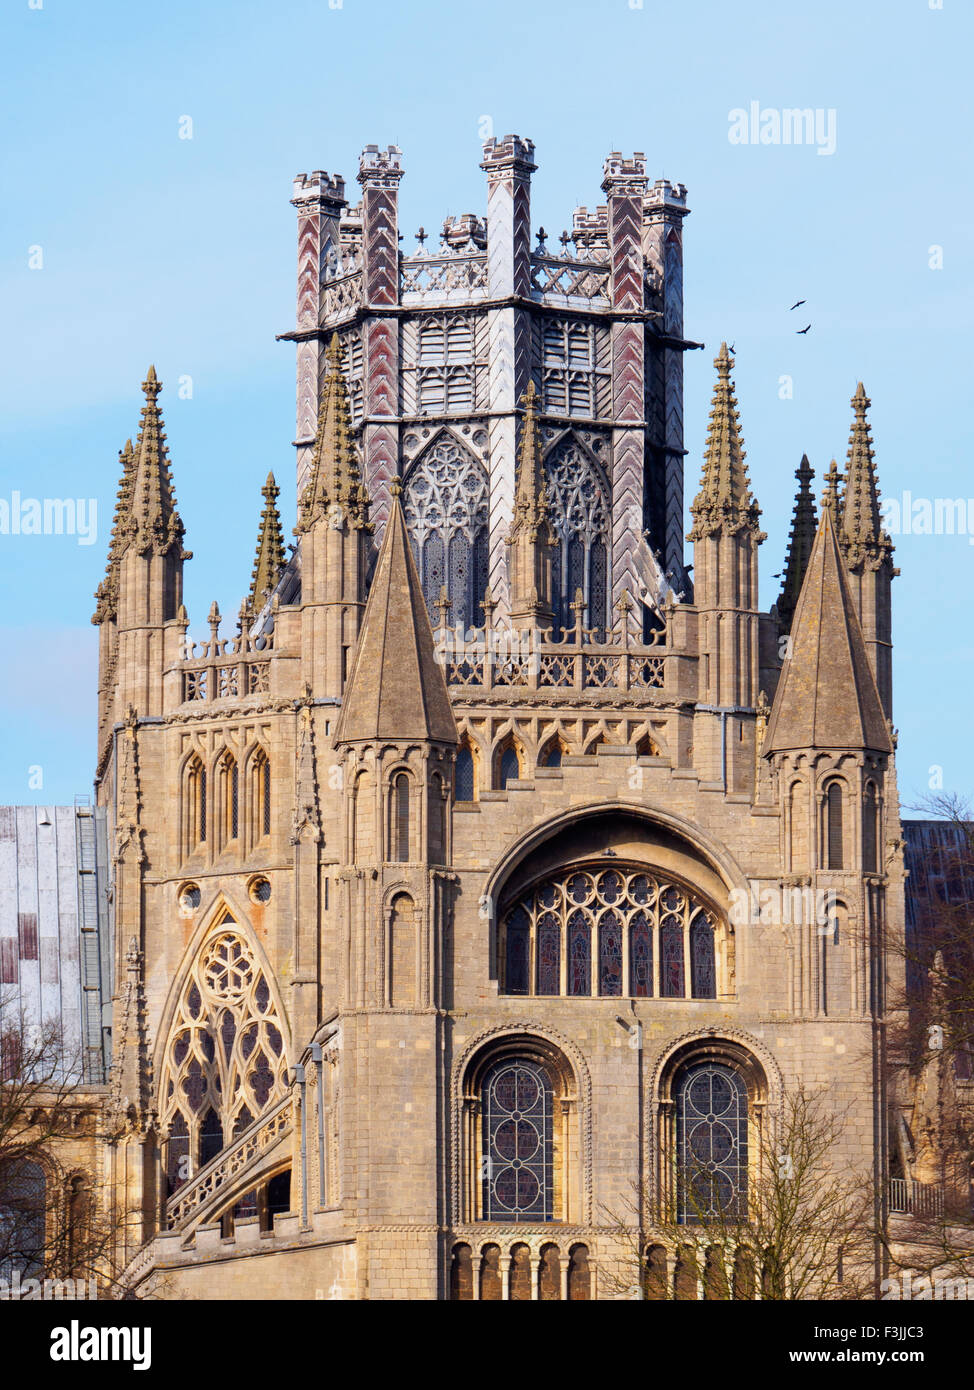 The famous lantern on top of the Octagon of Ely Cathedral in Cambridgeshire, England, UK. Viewed from the south with a blue sky. Stock Photo